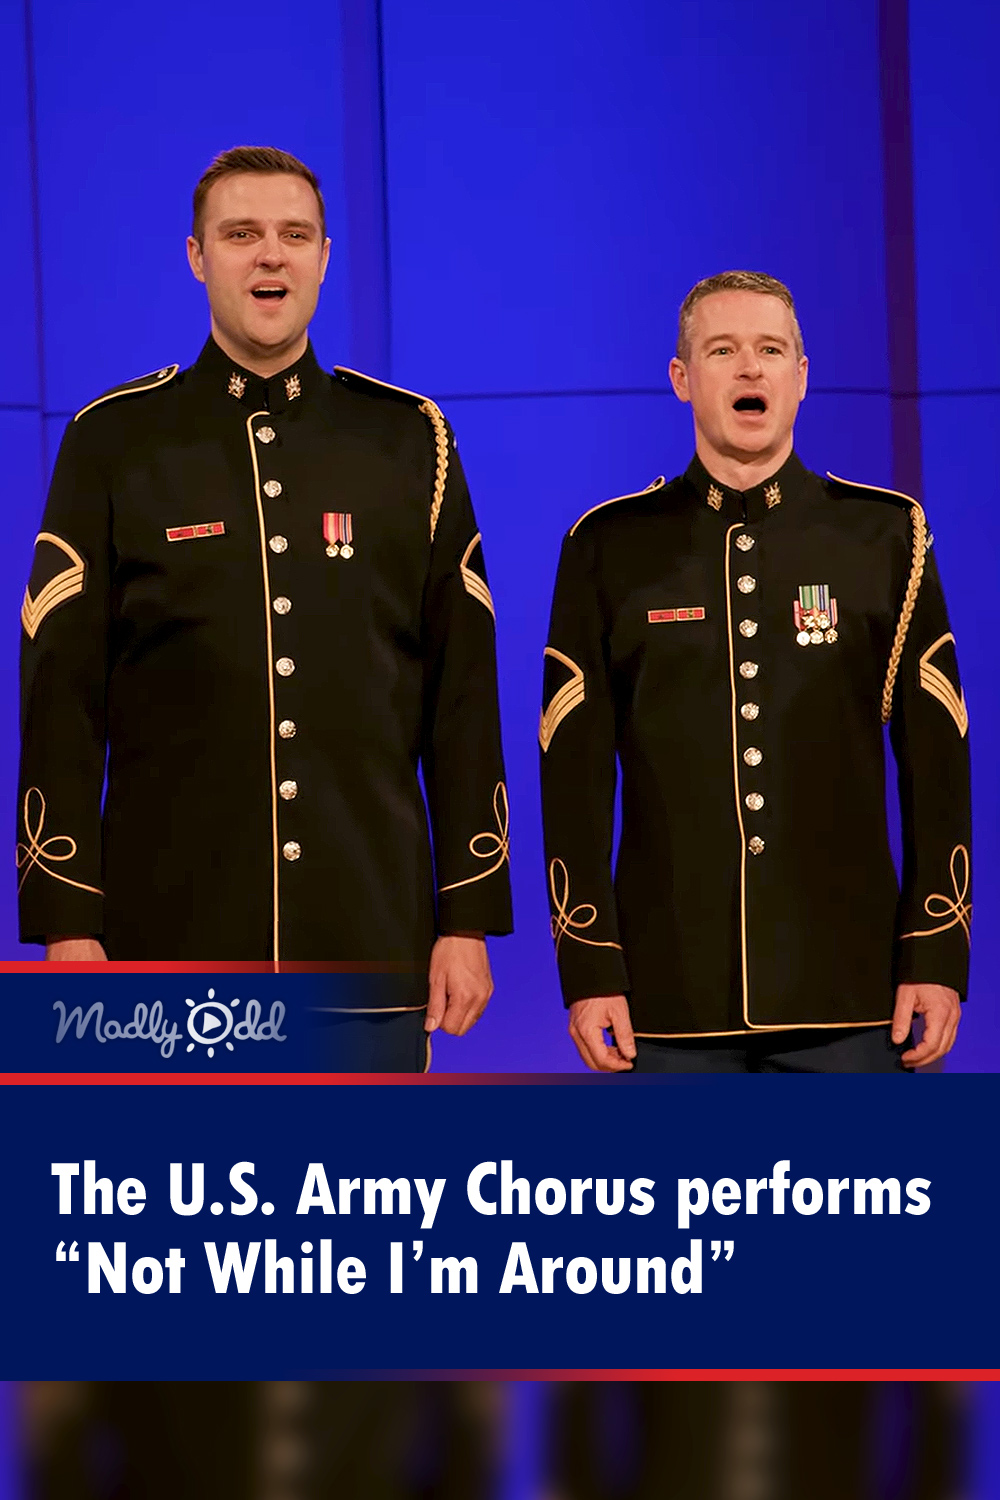 The U.S. Army Chorus performs “Not While I’m Around”